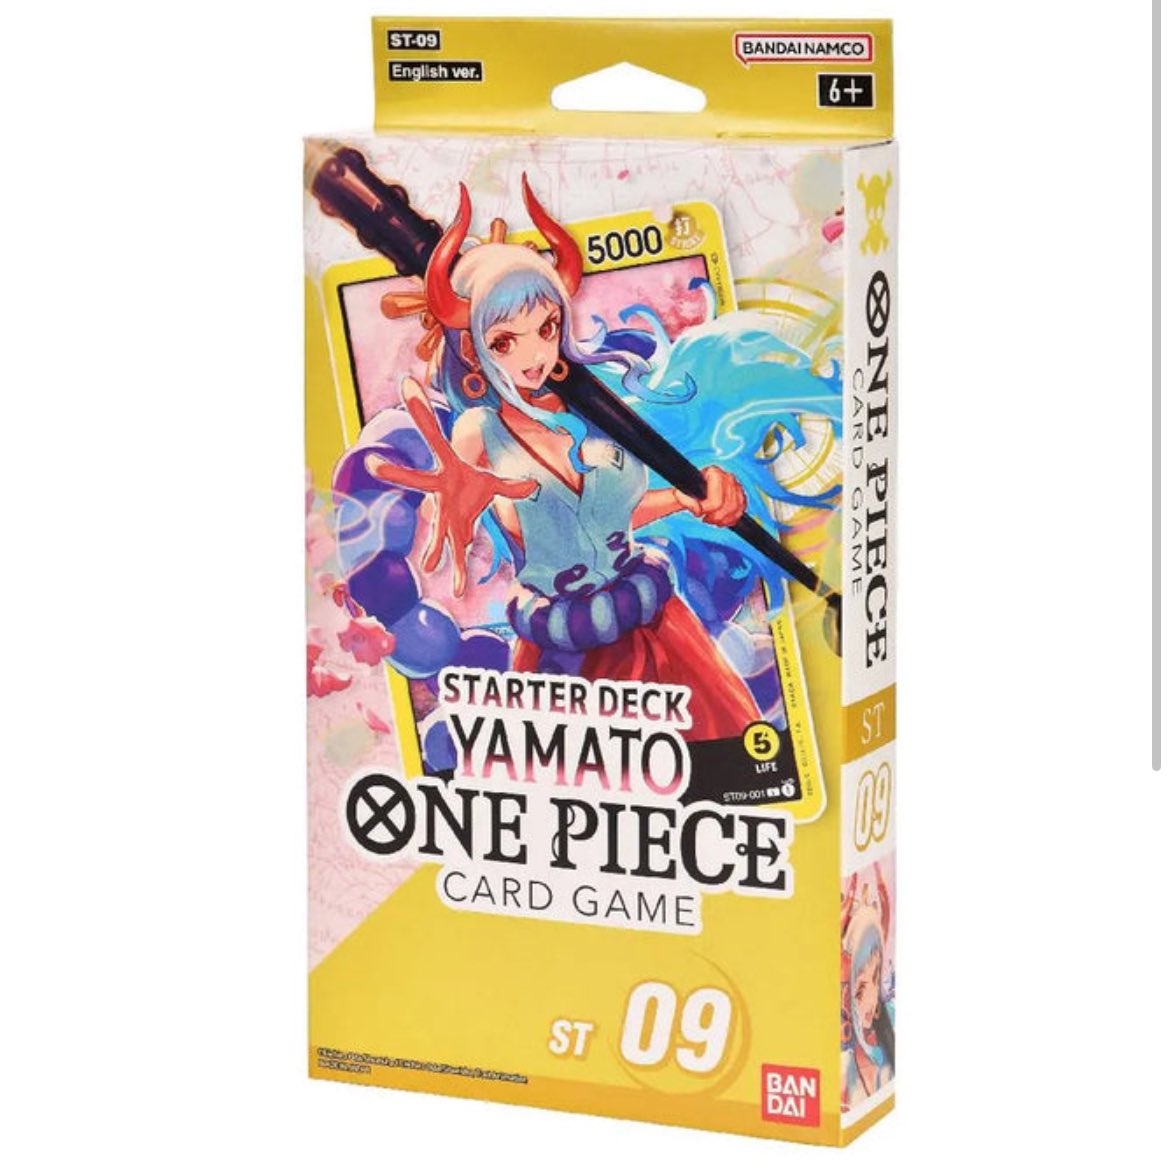 One piece English ST-09 Starter Deck
⭐️ Available on ToyTemple:

12.99$/MSRP 11.99$

thetoytemple.com/products/one-p…